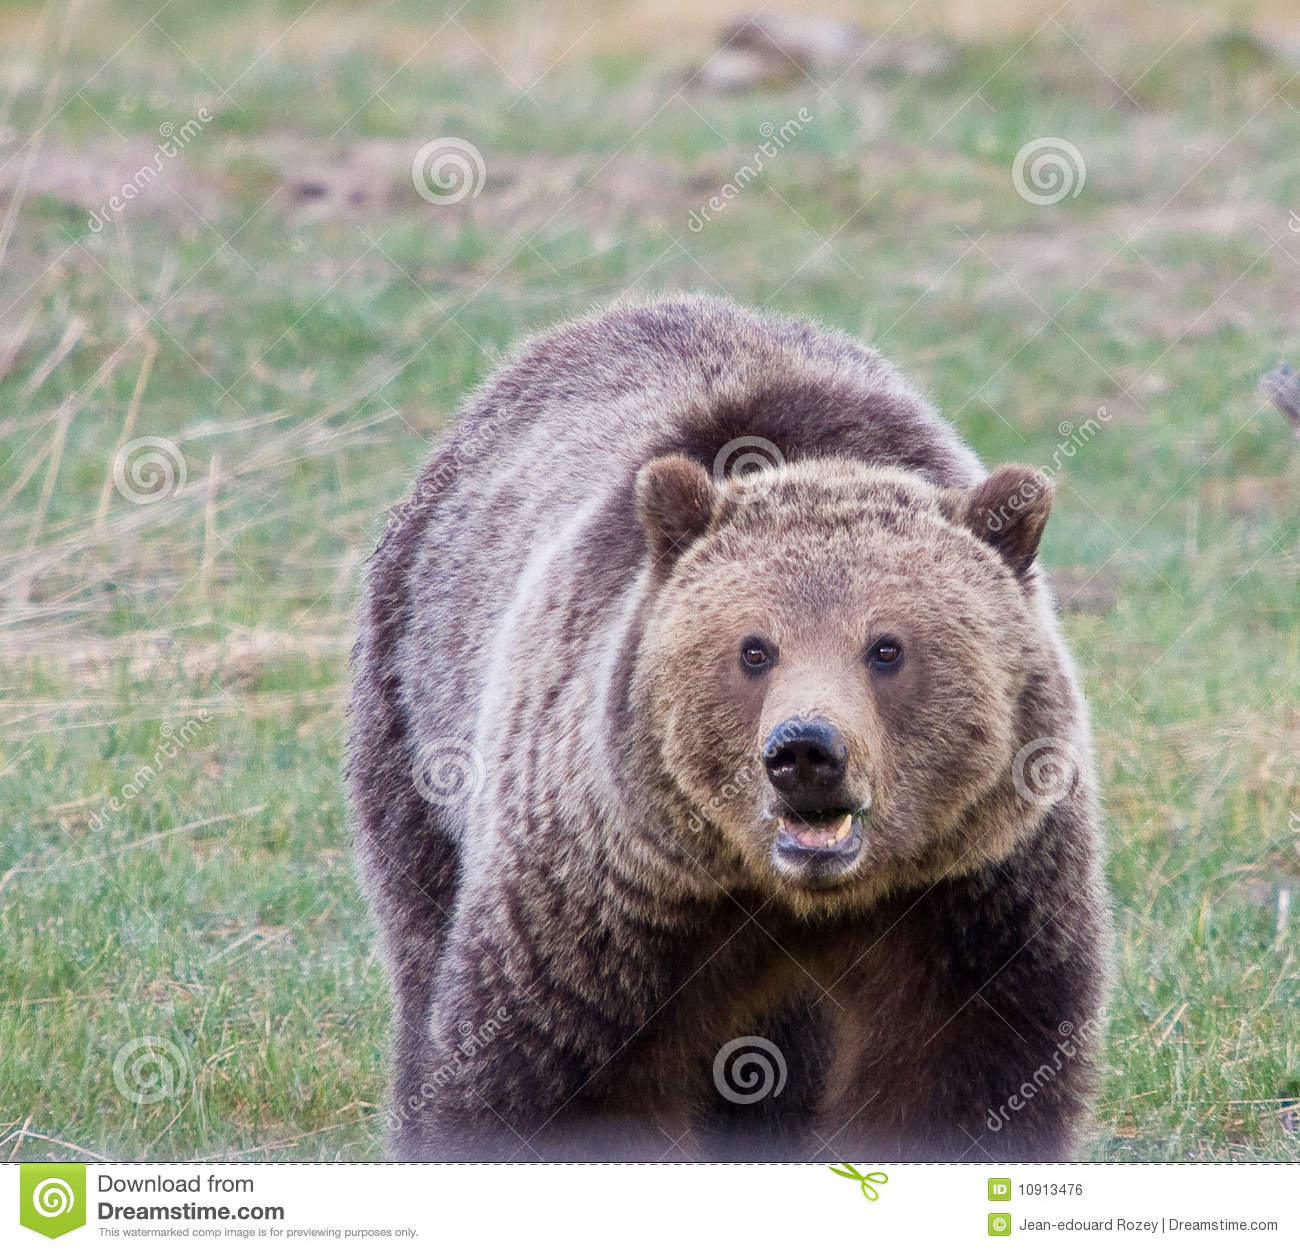 Grizzly Bear Royalty Free Stock Image   Image  10913476